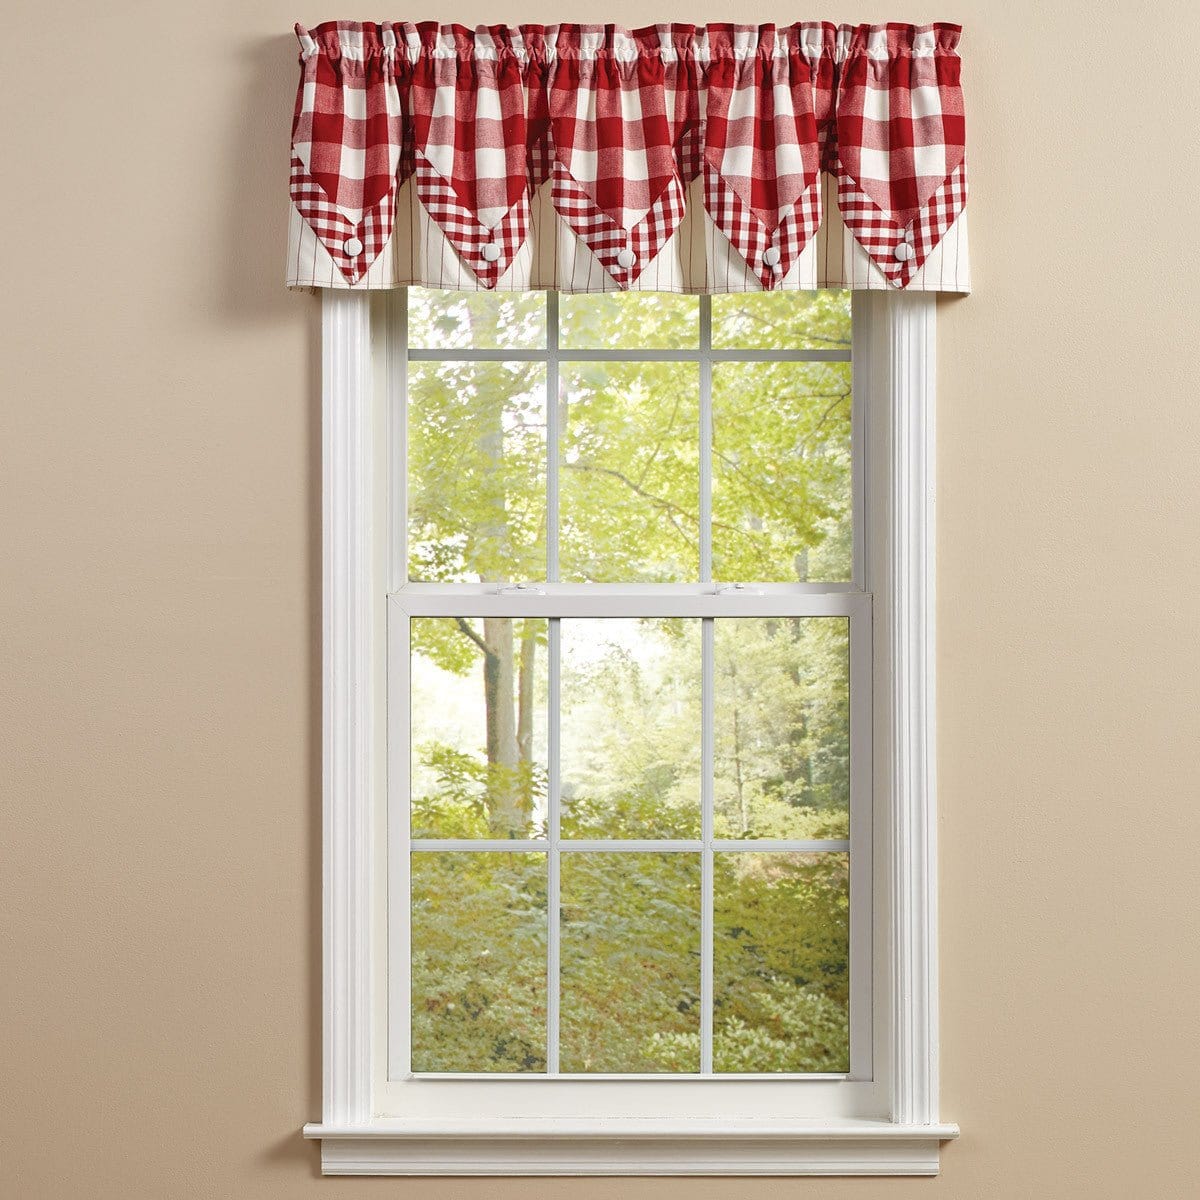 Wicklow Check in Red Point Valance Lined-Park Designs-The Village Merchant